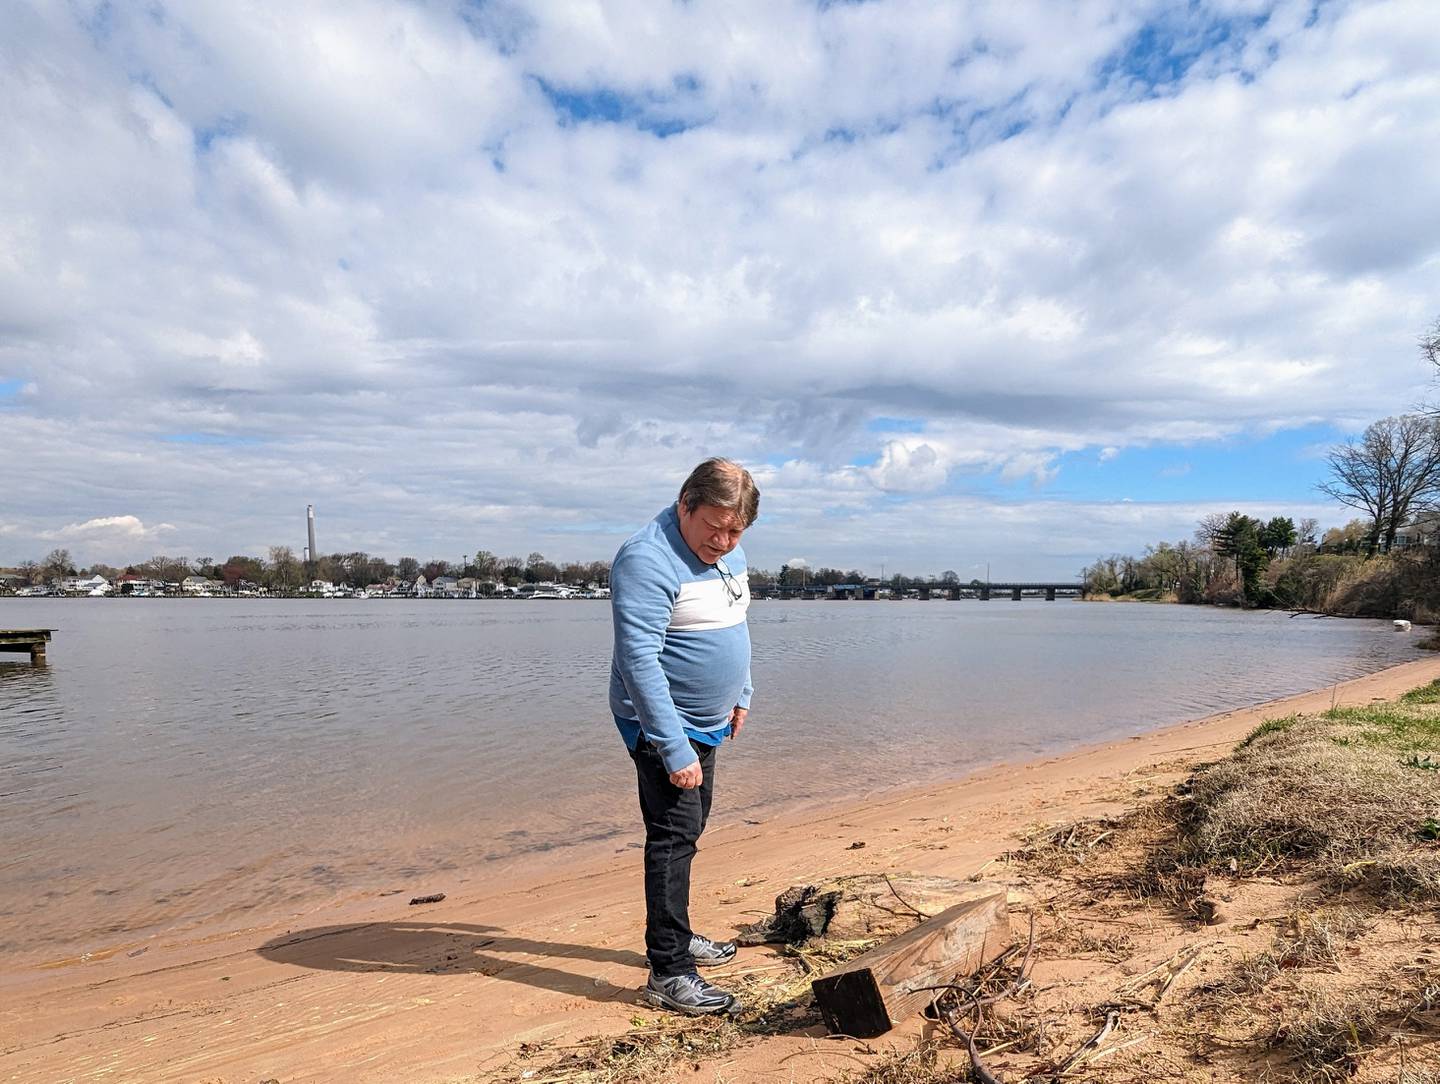 Ernie Dimler, who's lived on Stoney Creek in Pasadena for 30-plus years, points out some of the debris that's washed up since the Key Bridge Collapse on March 26.